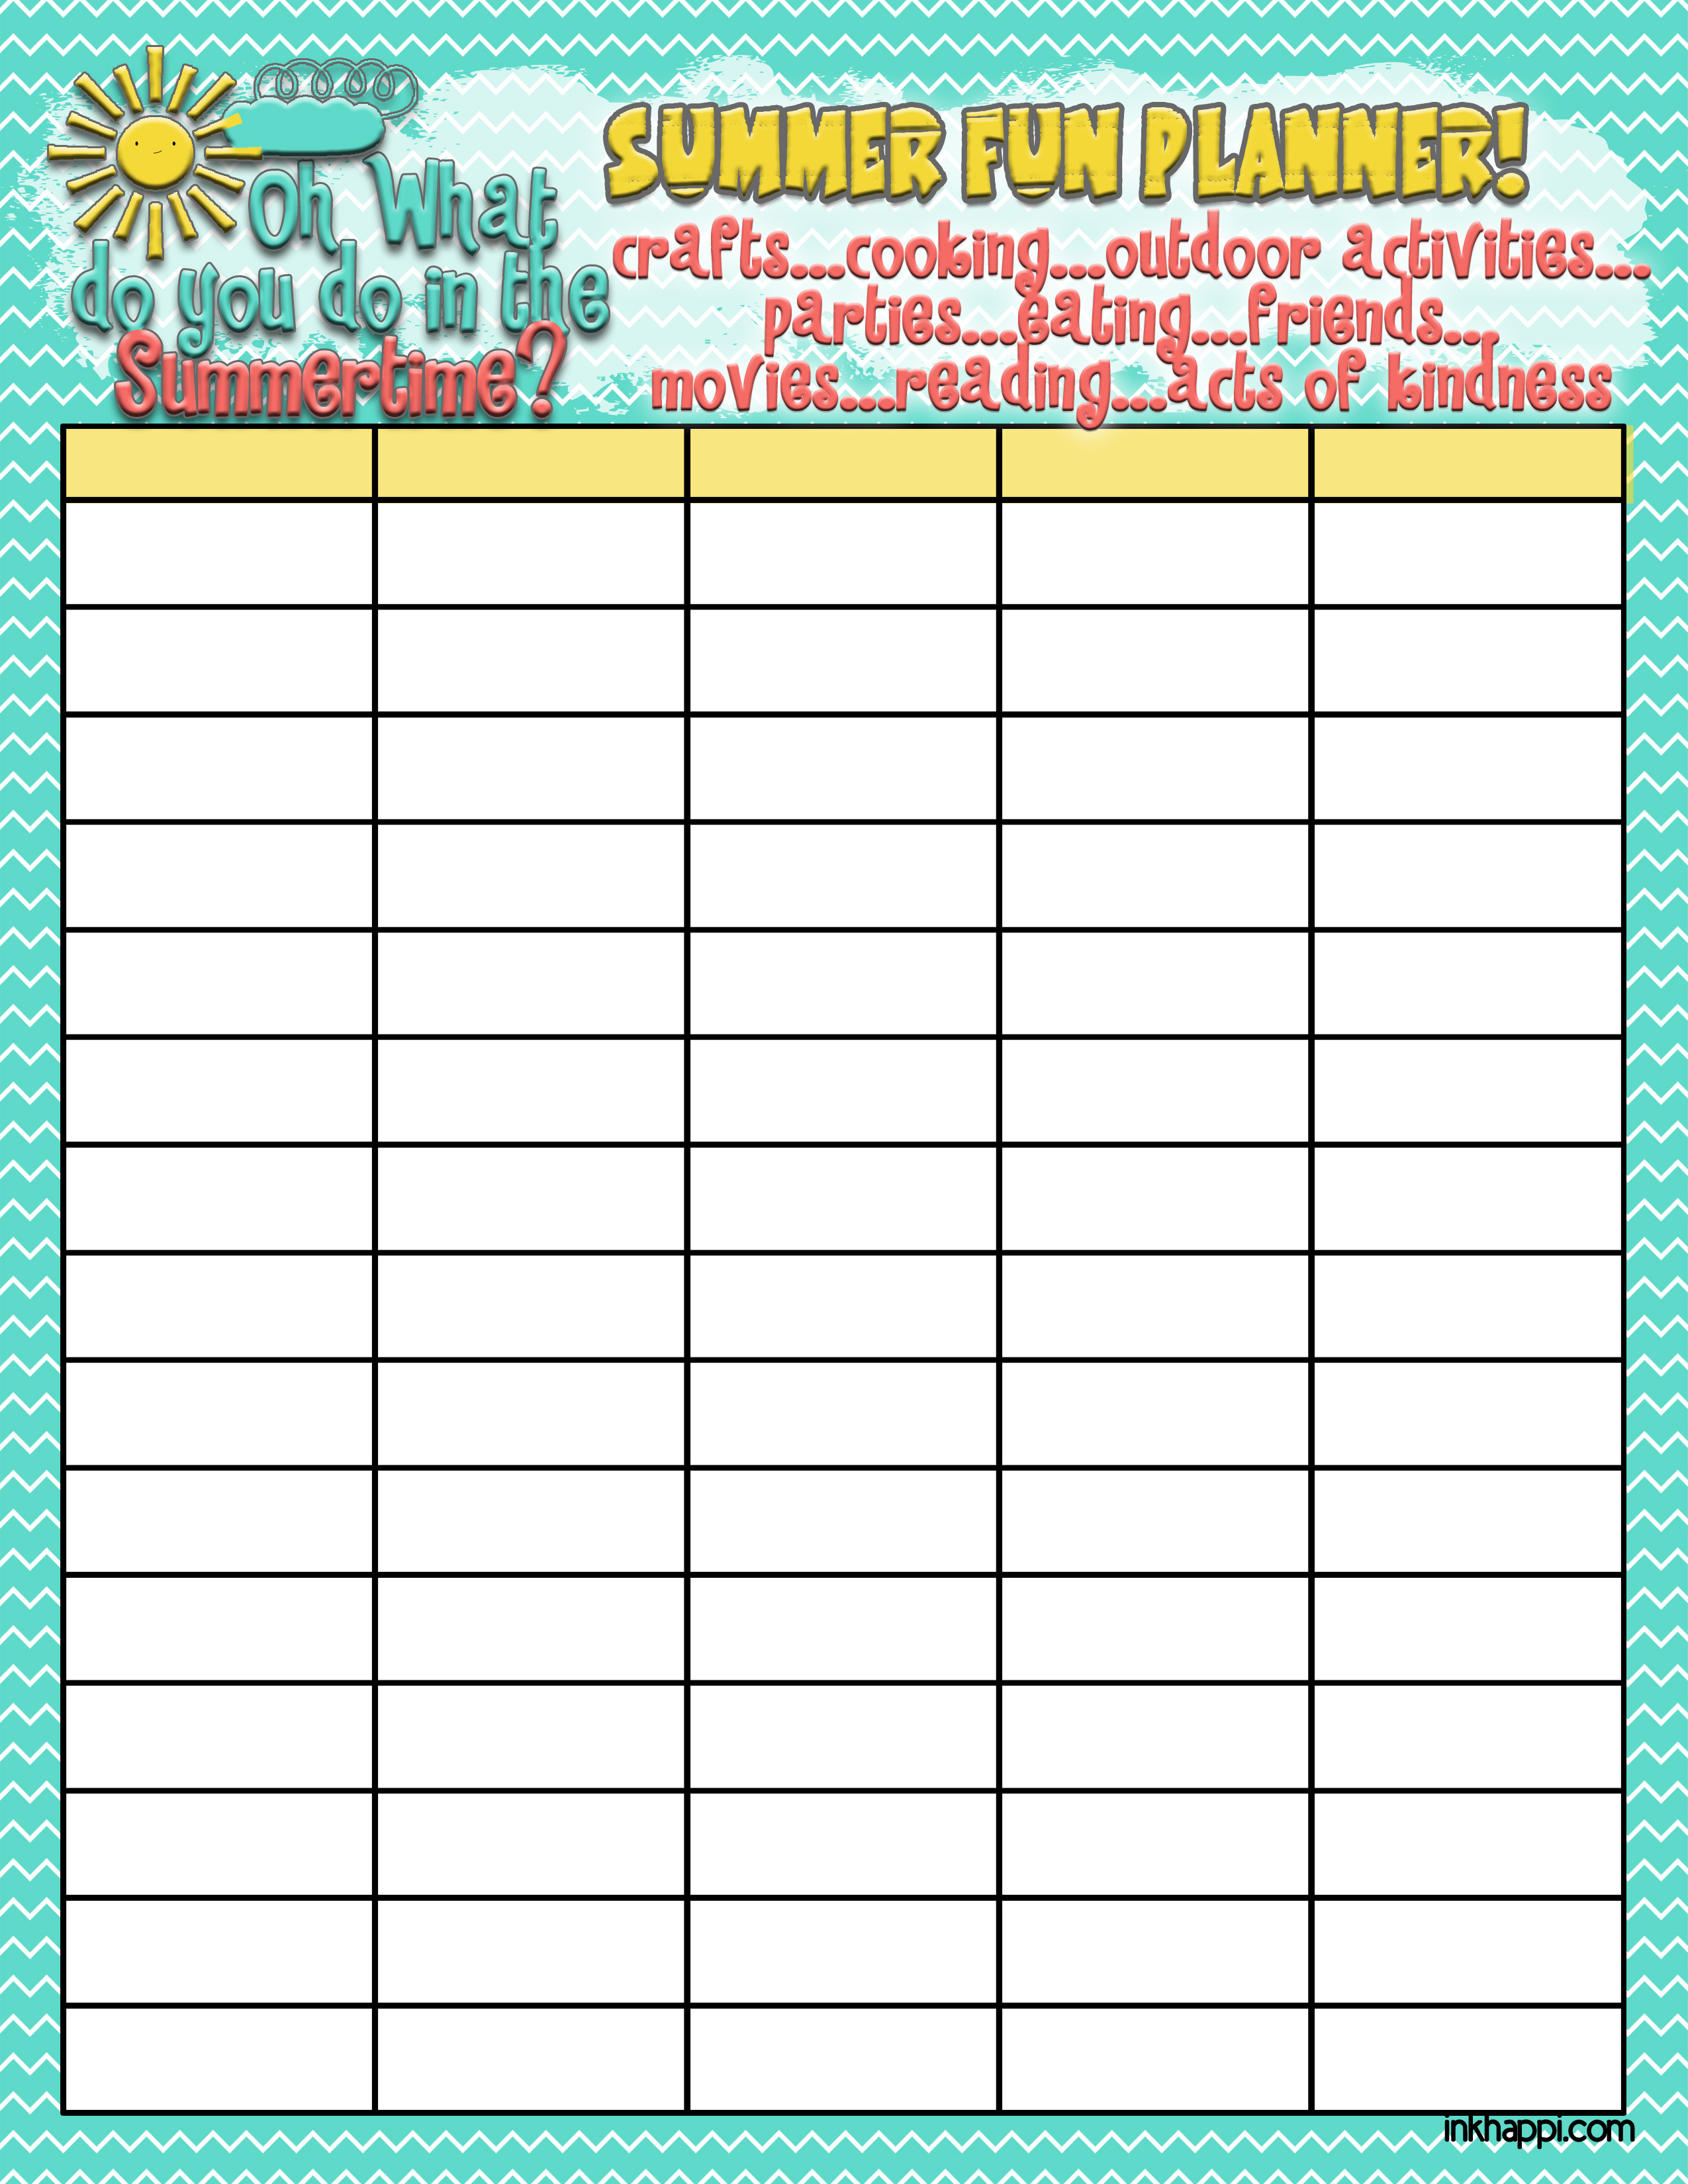 Summer Planning Calendars and ideas! inkhappi